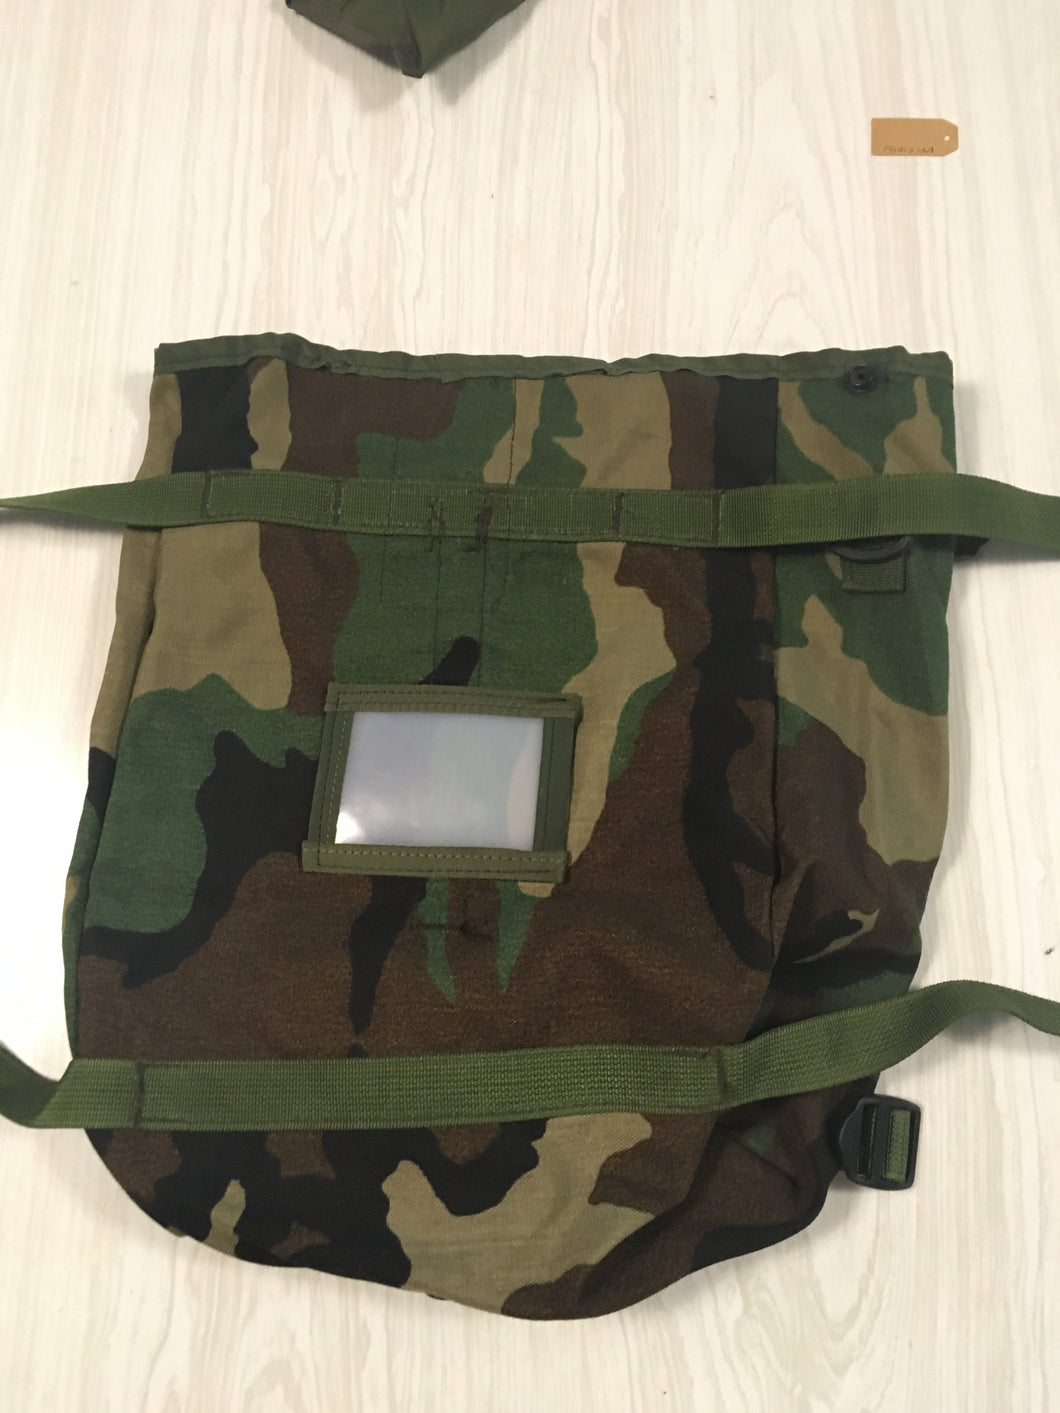 New Unissued Molle II Radio Pouch 8465-01-465-2057 In Woodland Camo